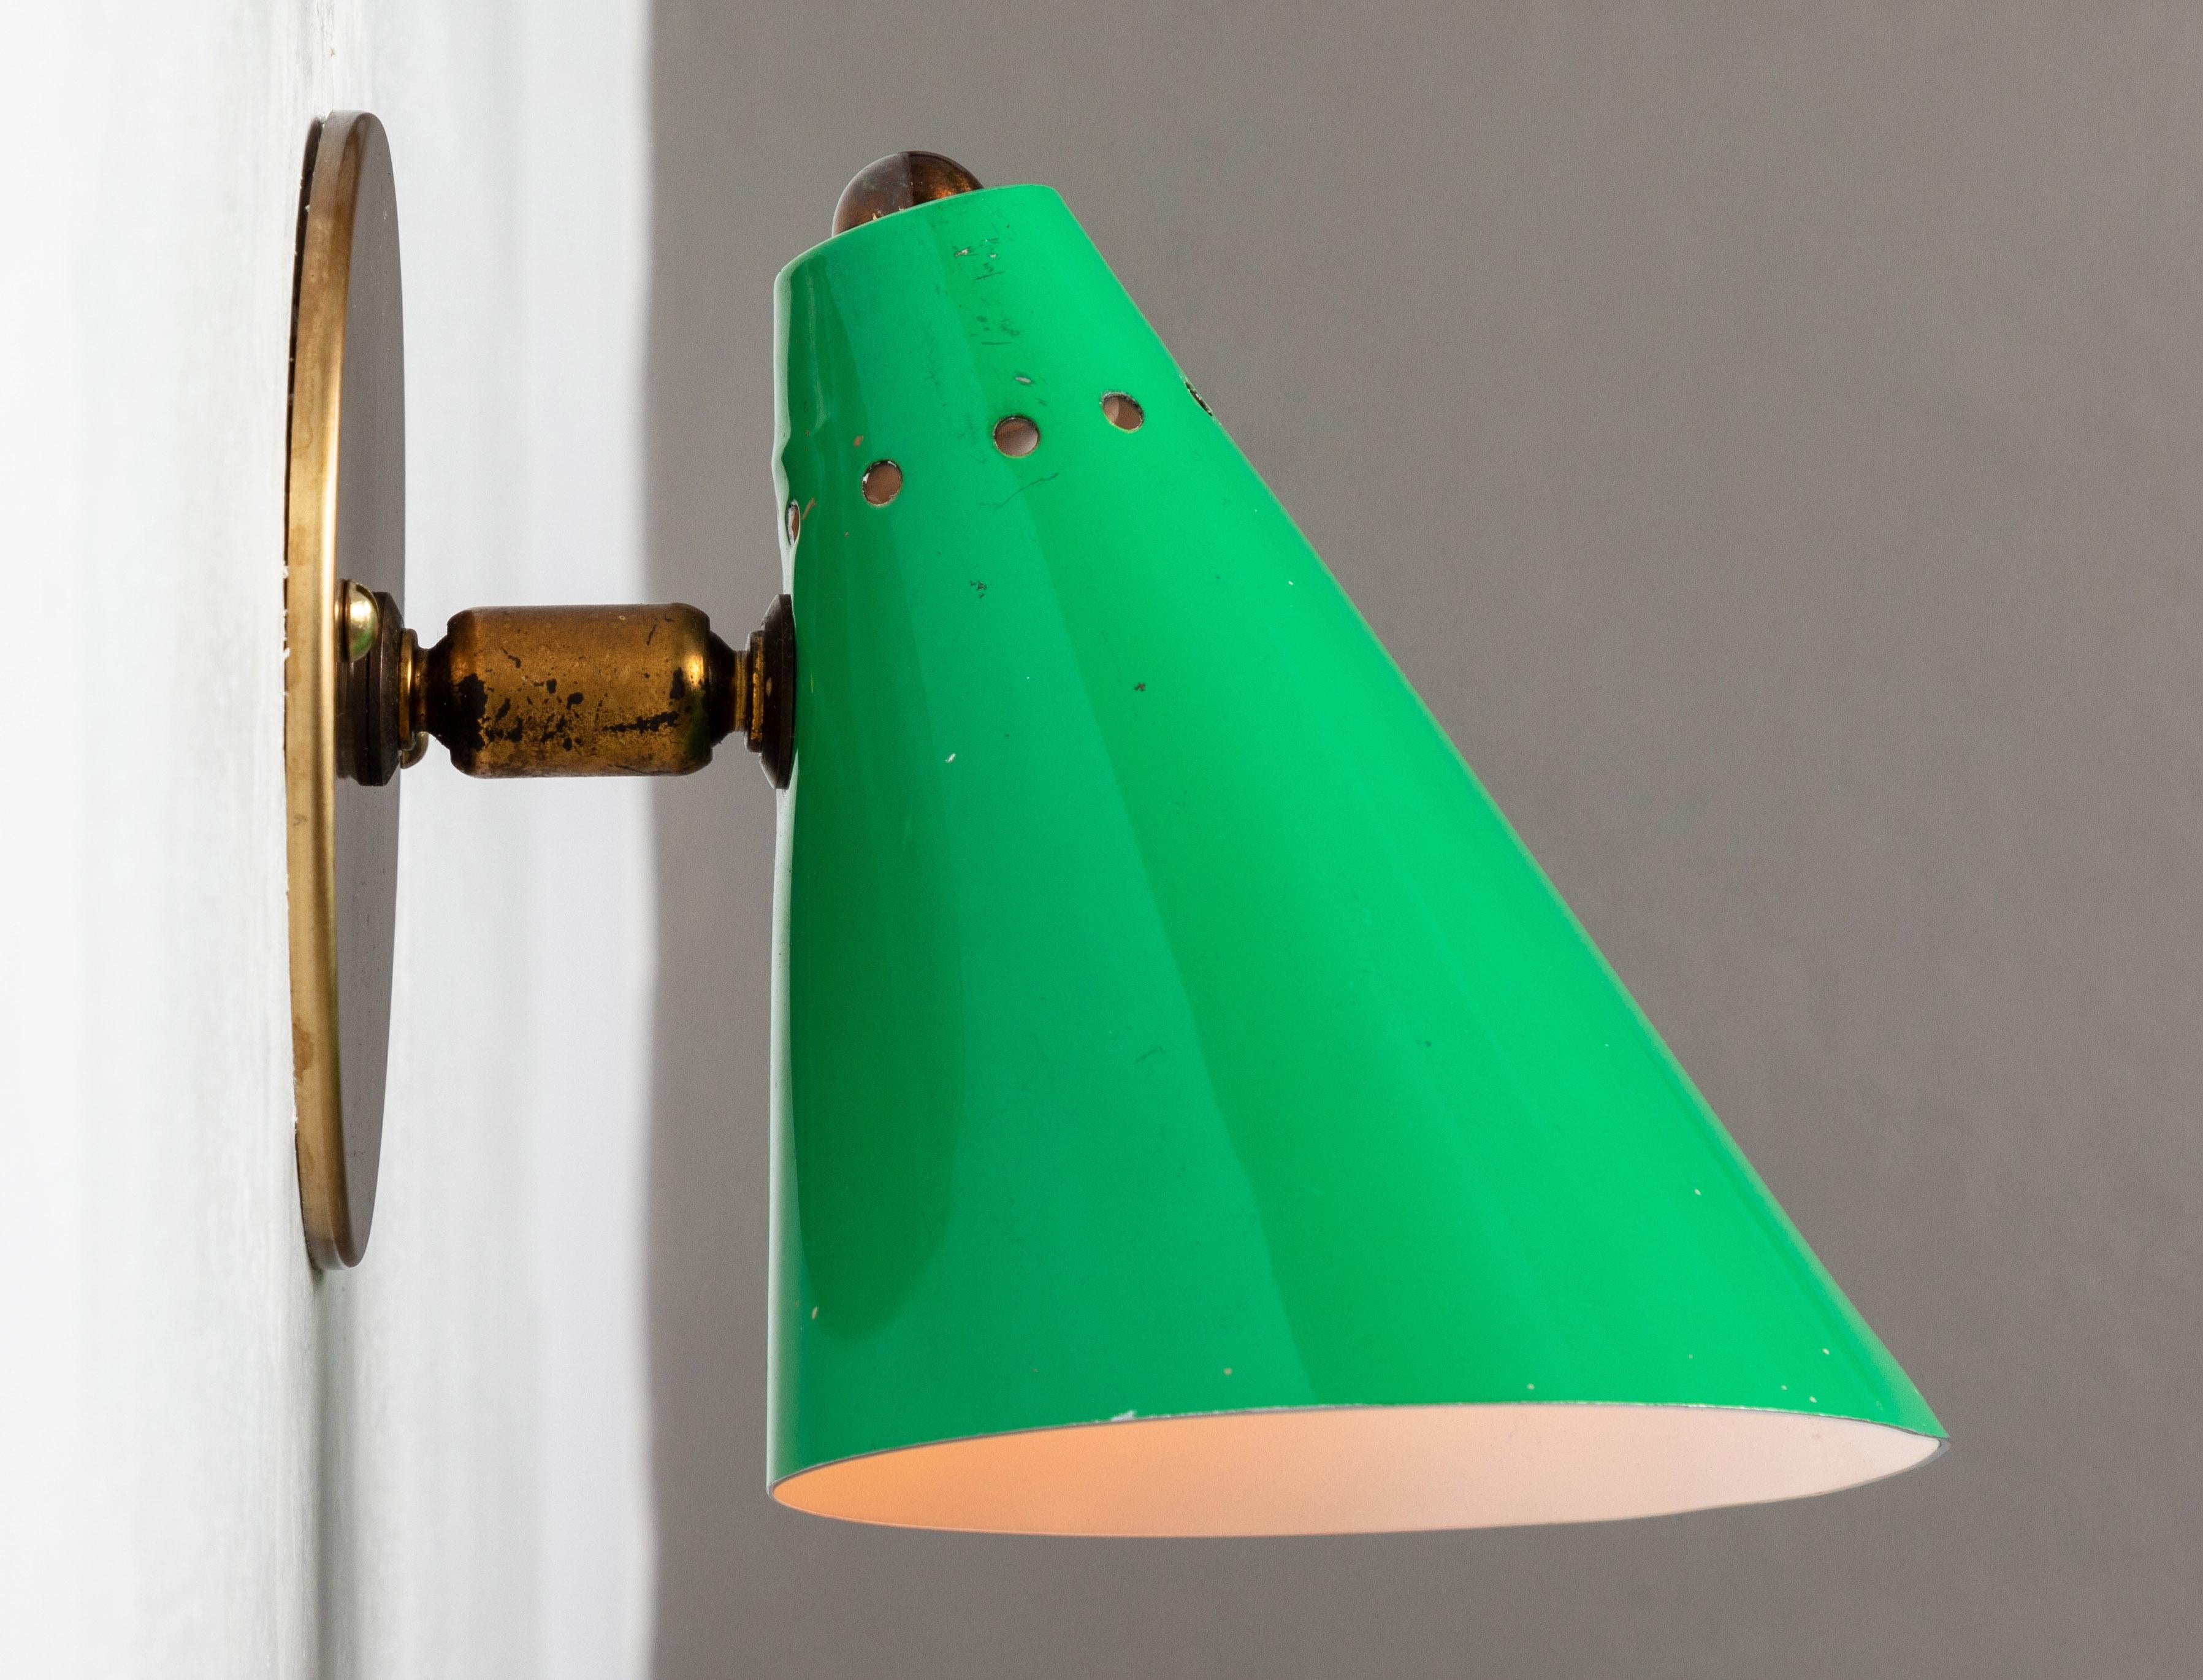 Pair of 1950s Italian green cone sconce in the manner of Arteluce. Executed in enameled green metal and patinated brass. Shades adjustable. A very clean and simple Italian midcentury design reminiscent of the output of Arteluce and Stilnovo.

Only